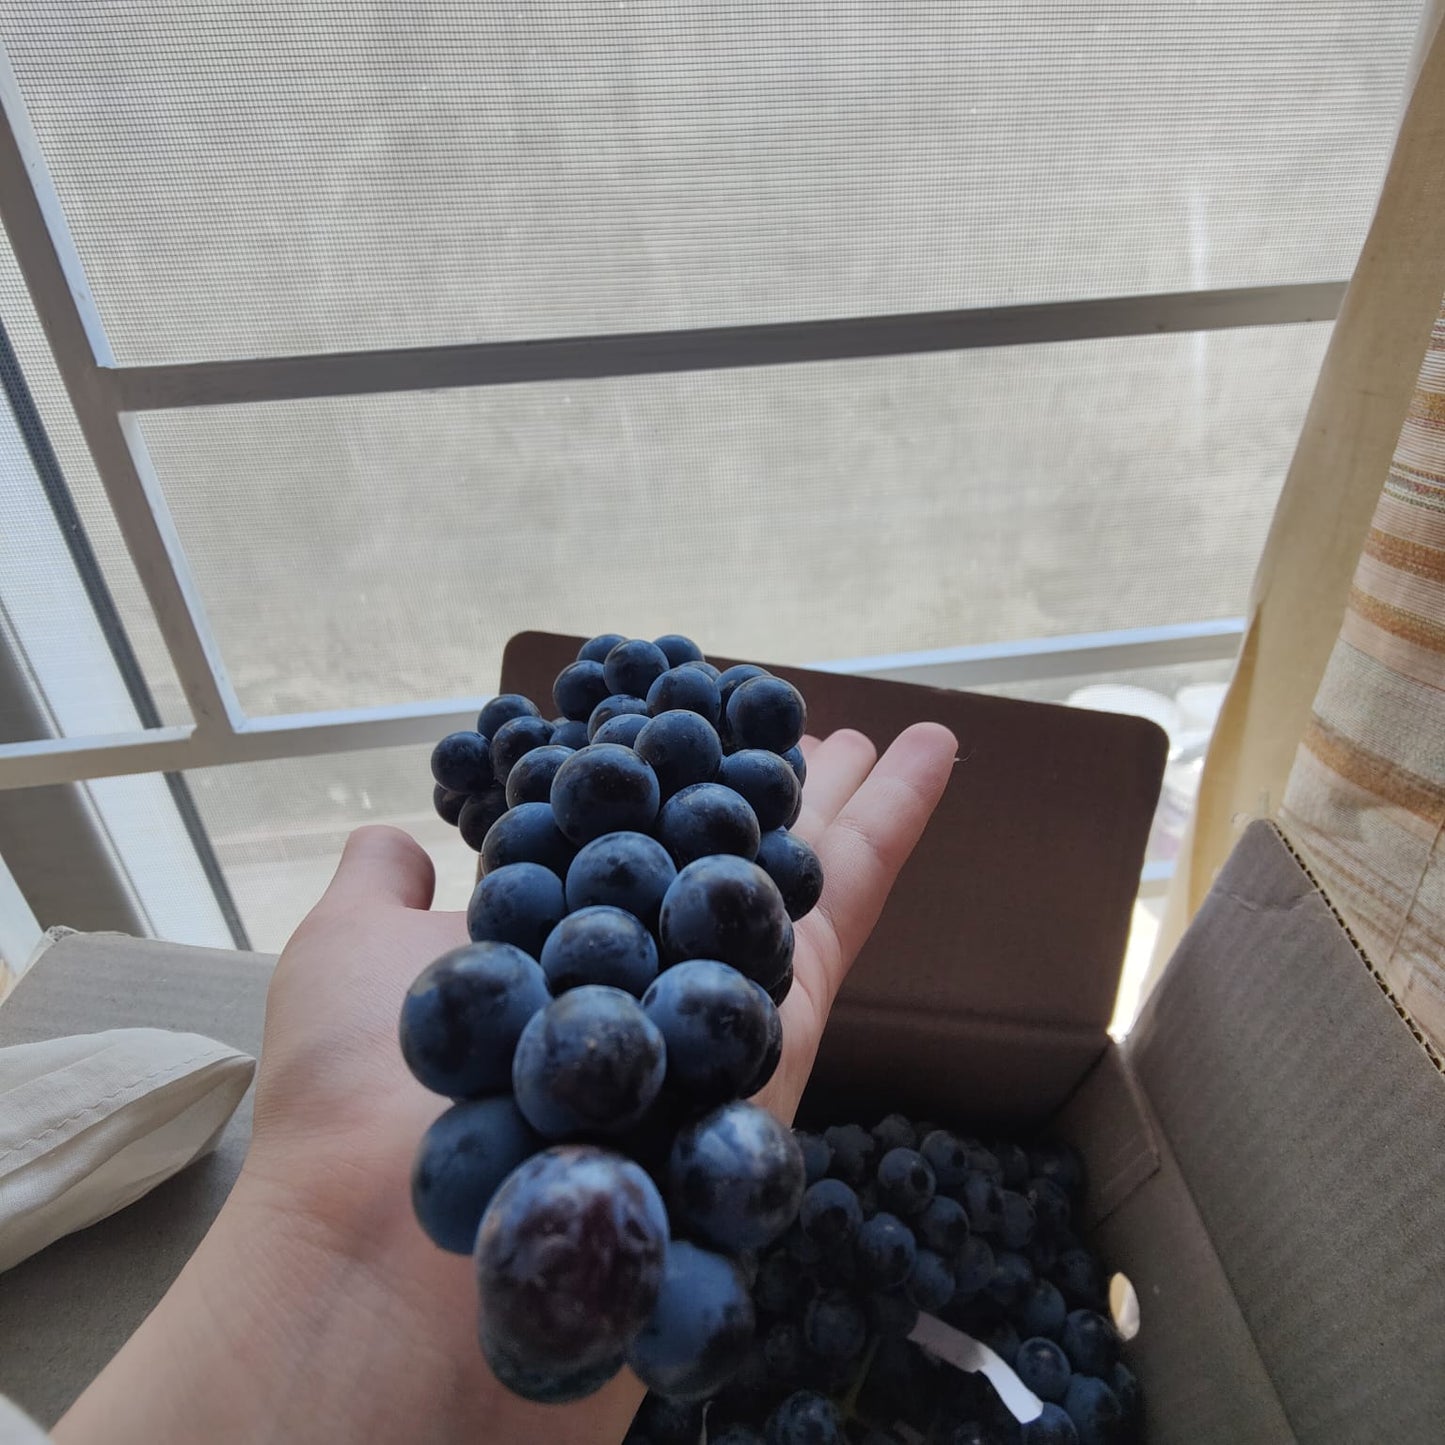 BLUEBERRY GRAPES